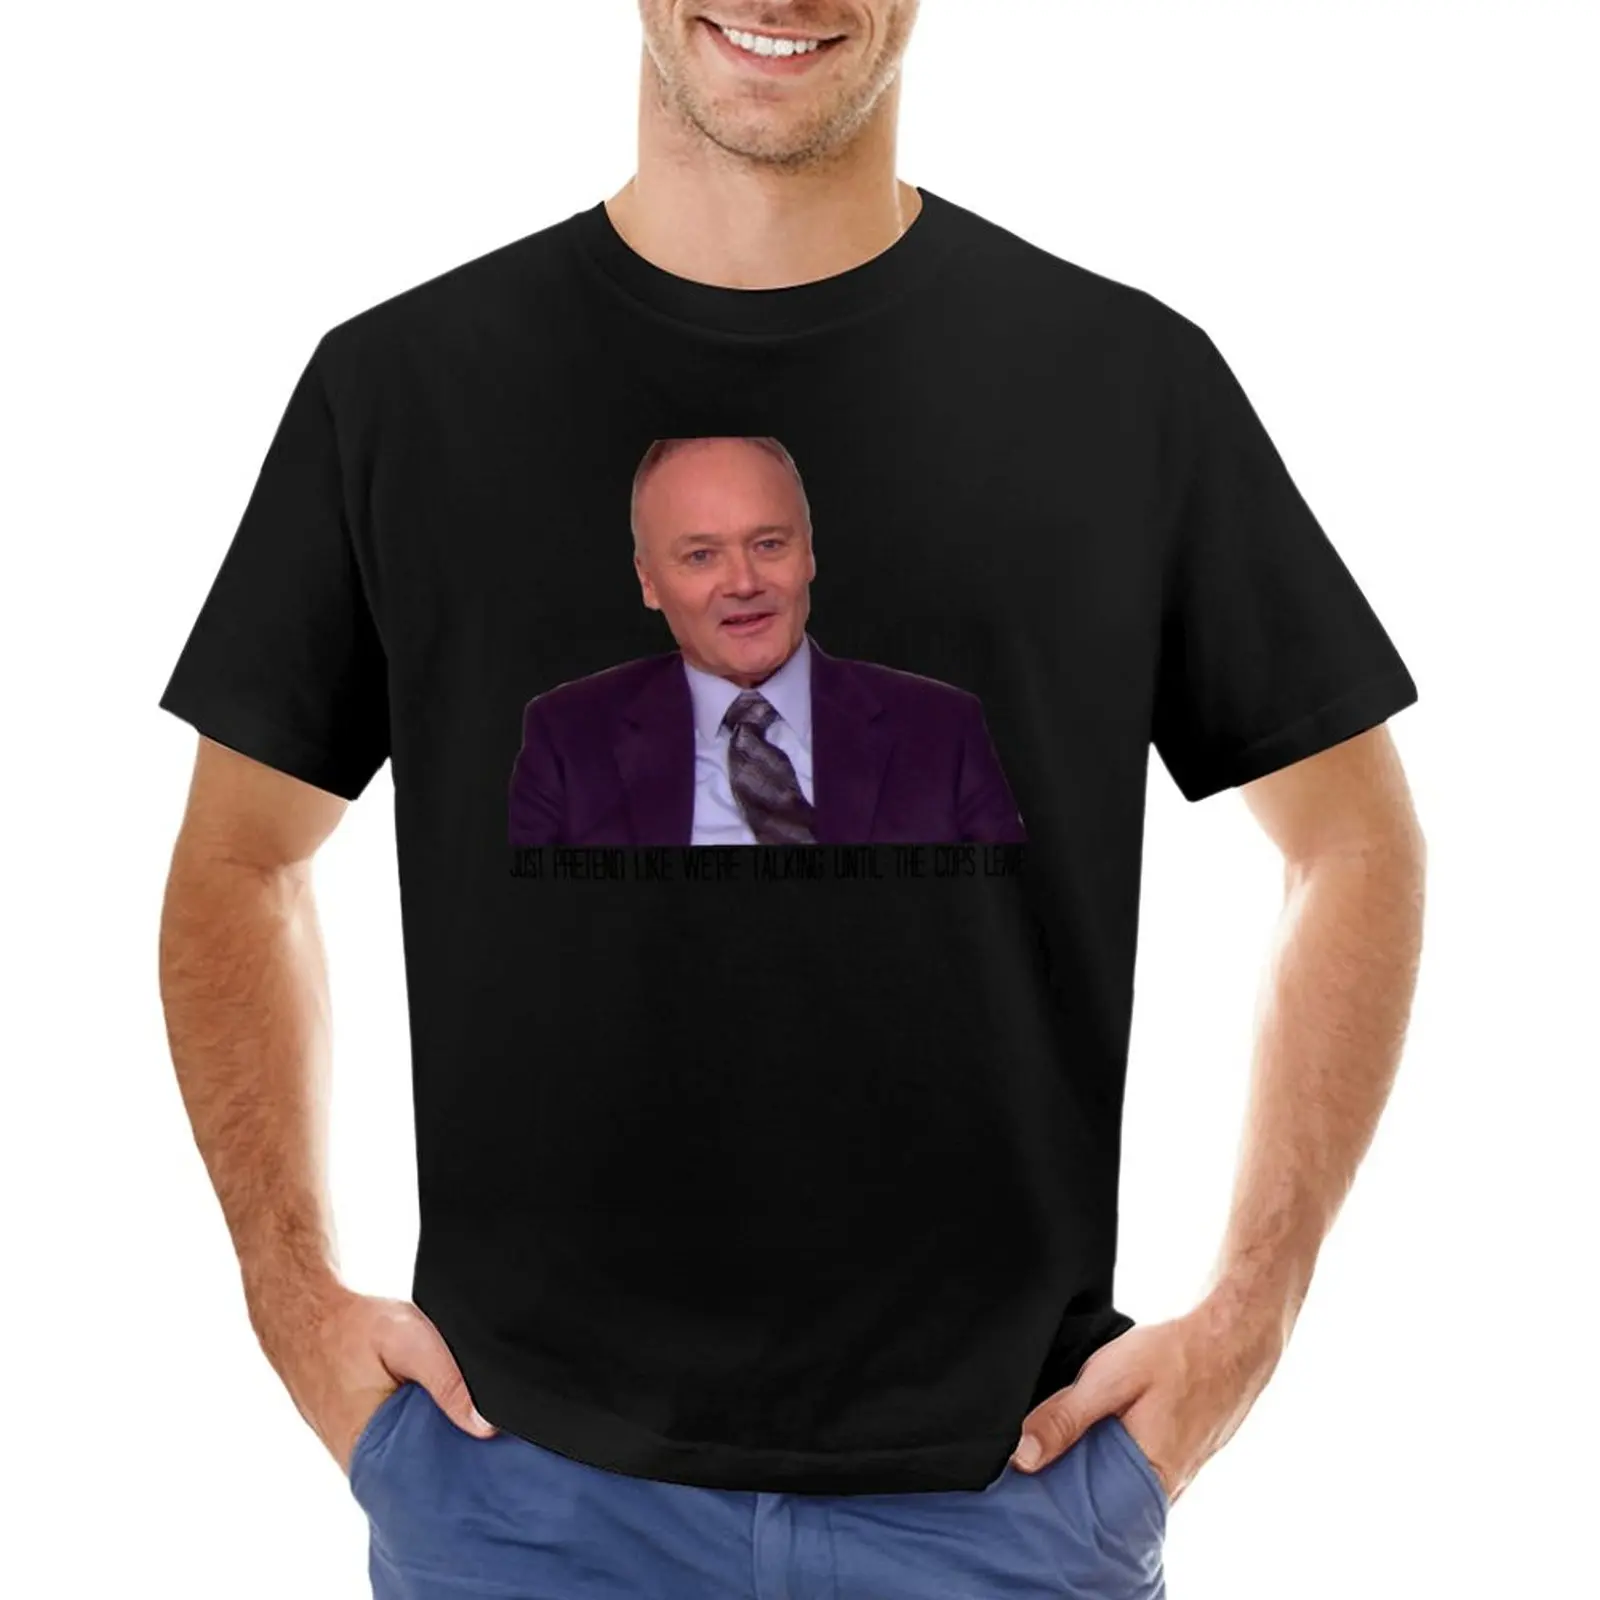 

The Only Person Who Ever Stole from Creed Bratton T-Shirt summer tops black t shirts heavyweight t shirts for men